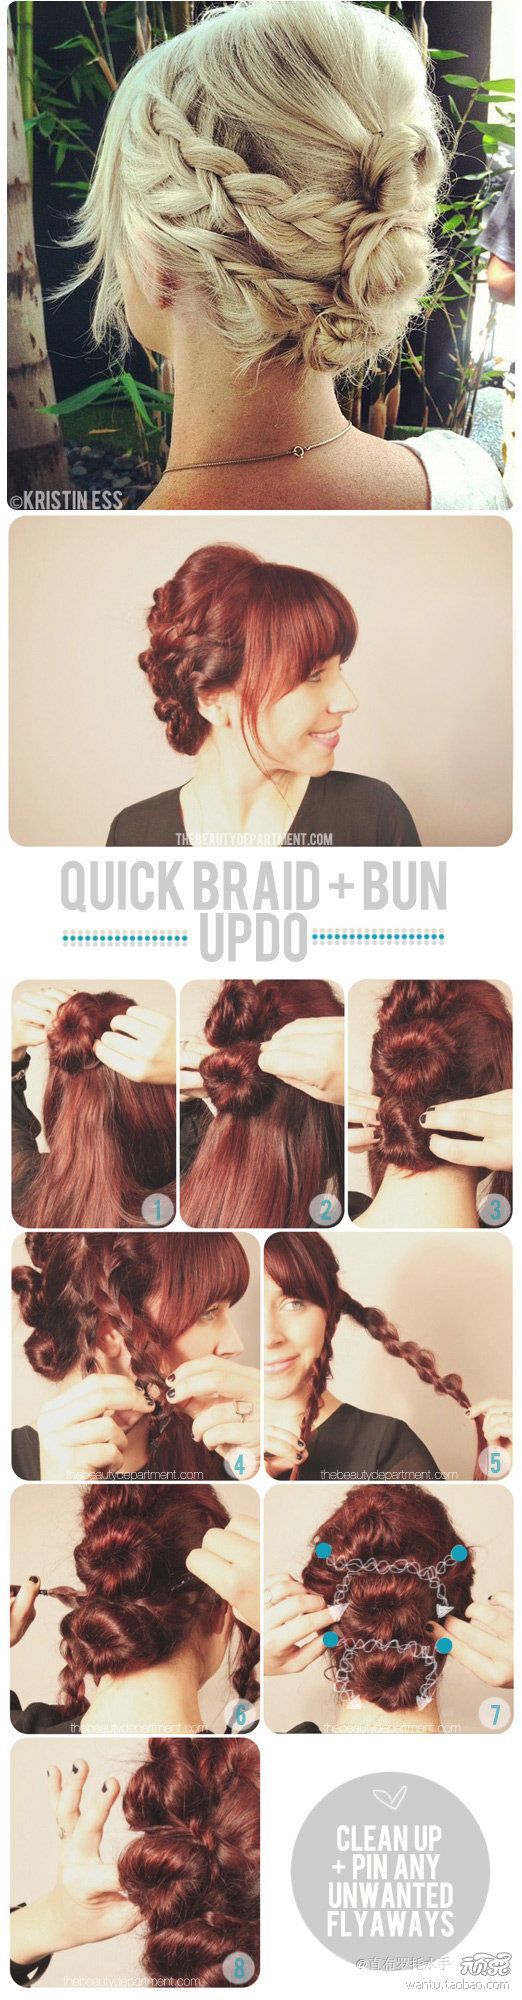 DIY Quick Braid and Bun Updo Hairstyle